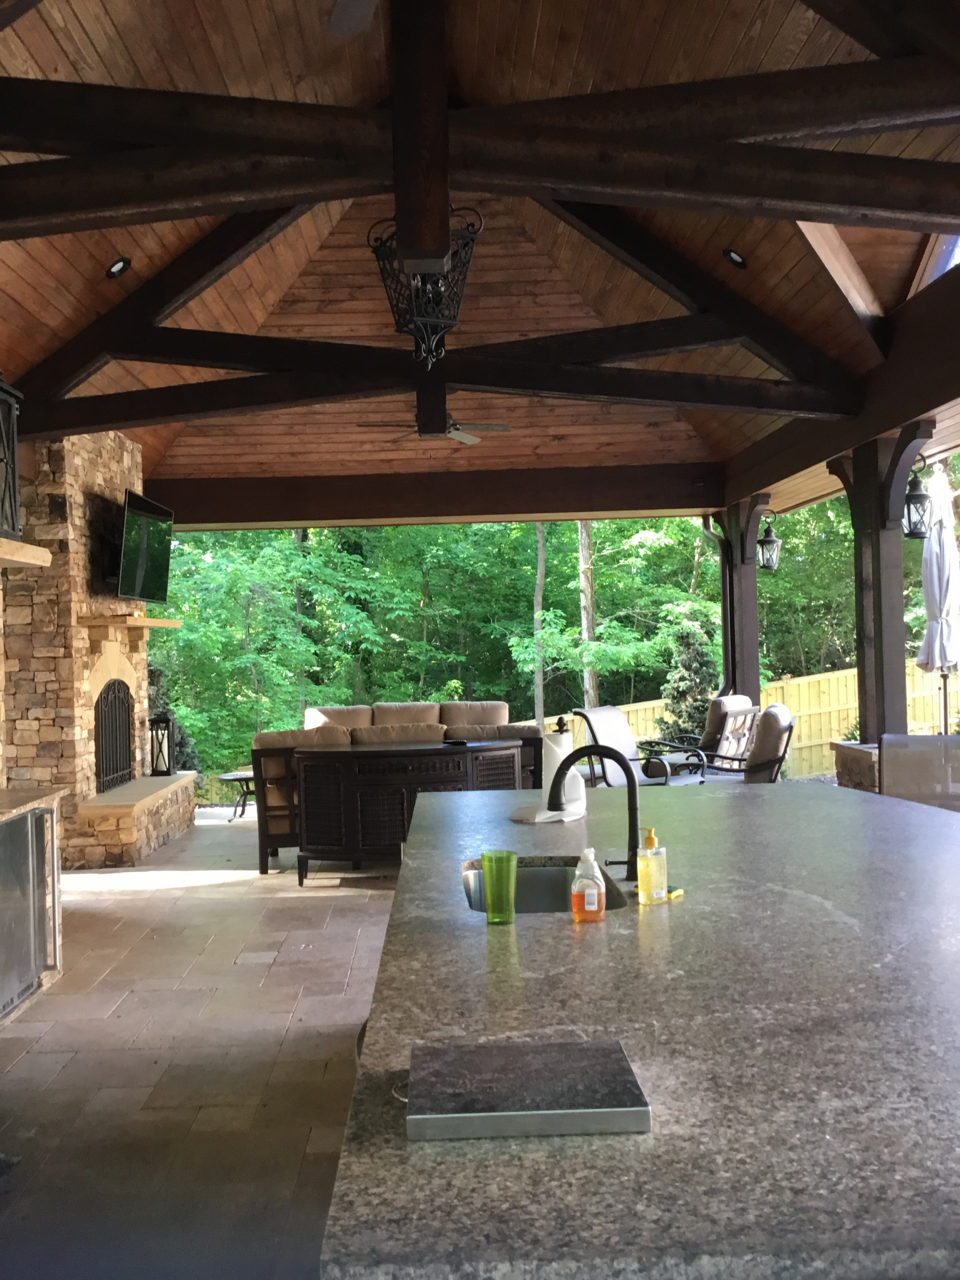 A picturesque vaulted cabana featuring a stone wall, fireplace, pizza oven, and fully equipped kitchen, adjacent to a luxurious swimming pool.